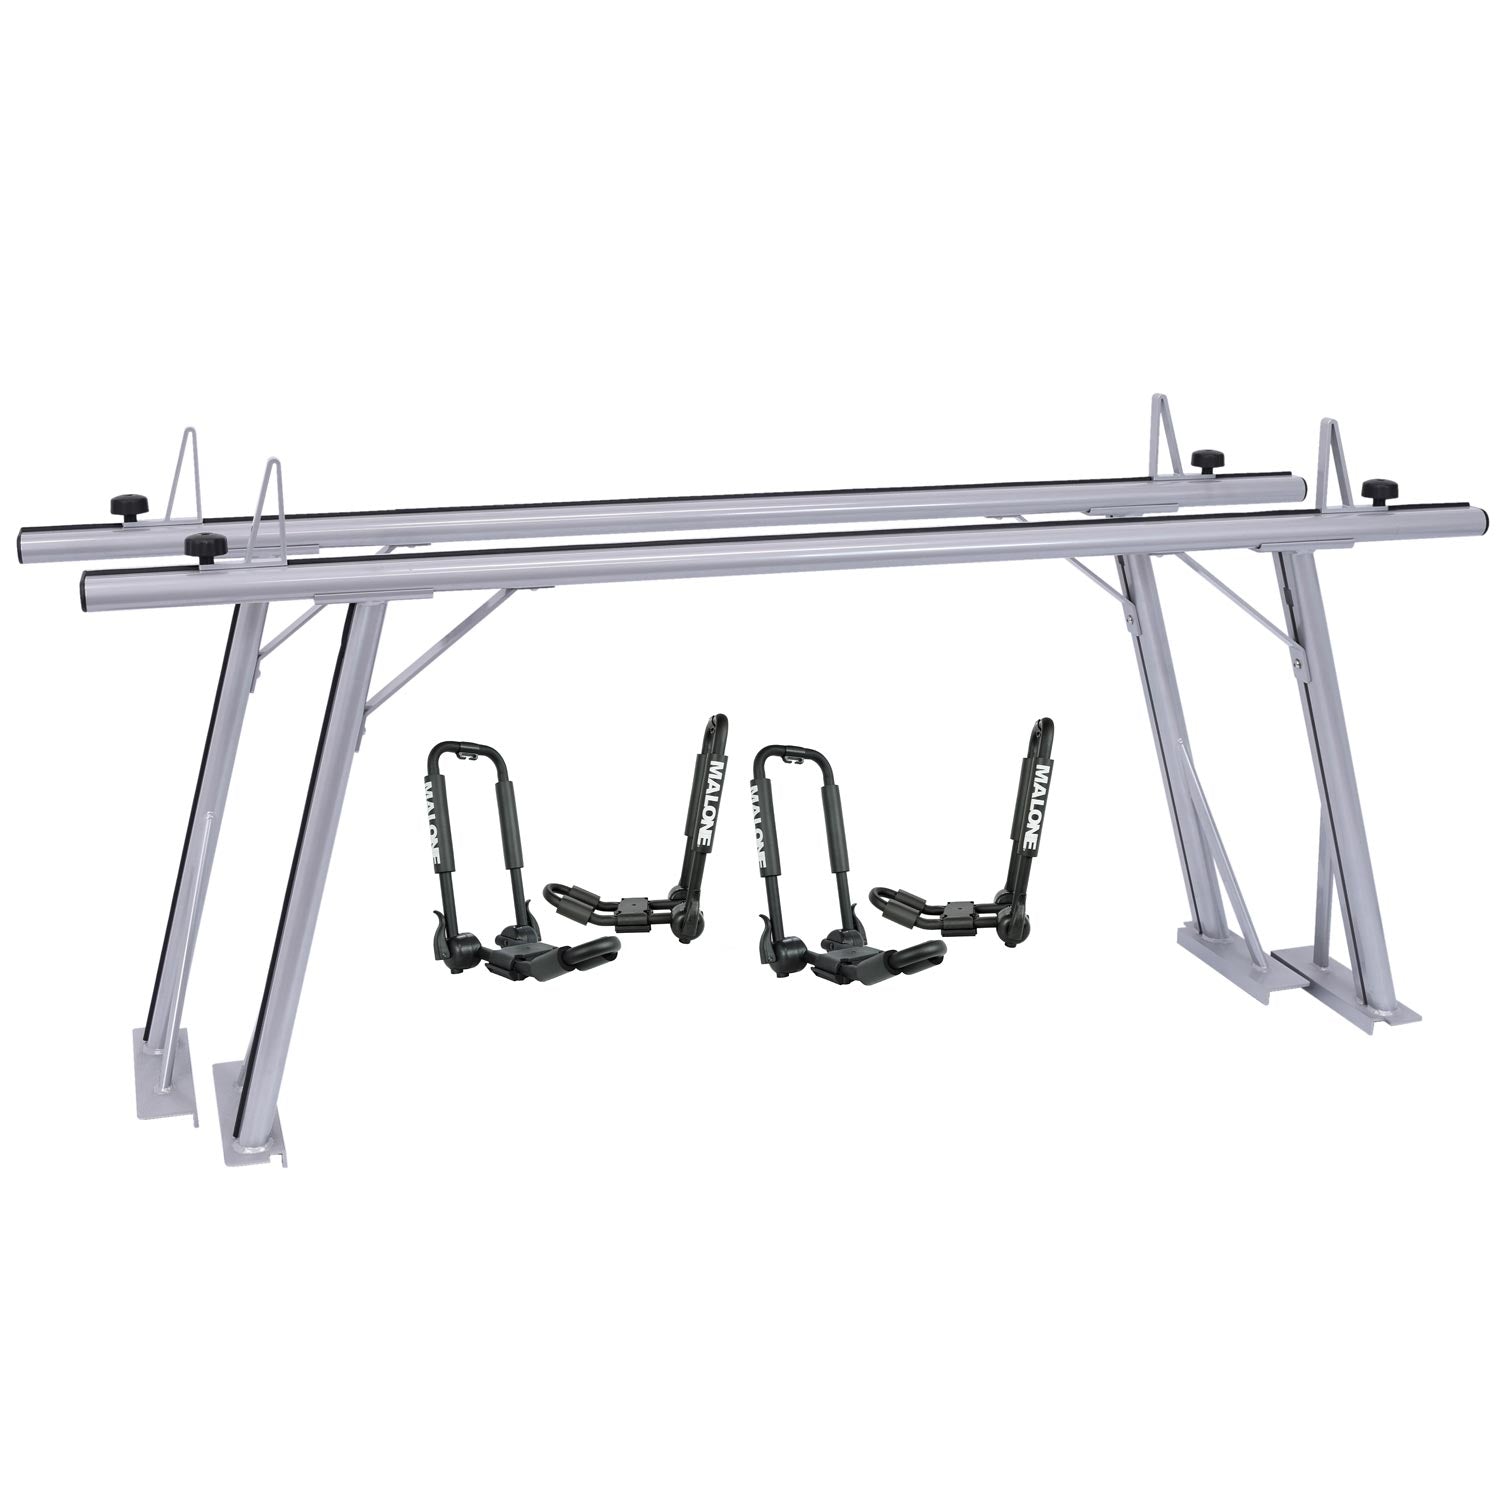 Malone TradeSport Truck Bed Rack with Foldaway J Carriers angle